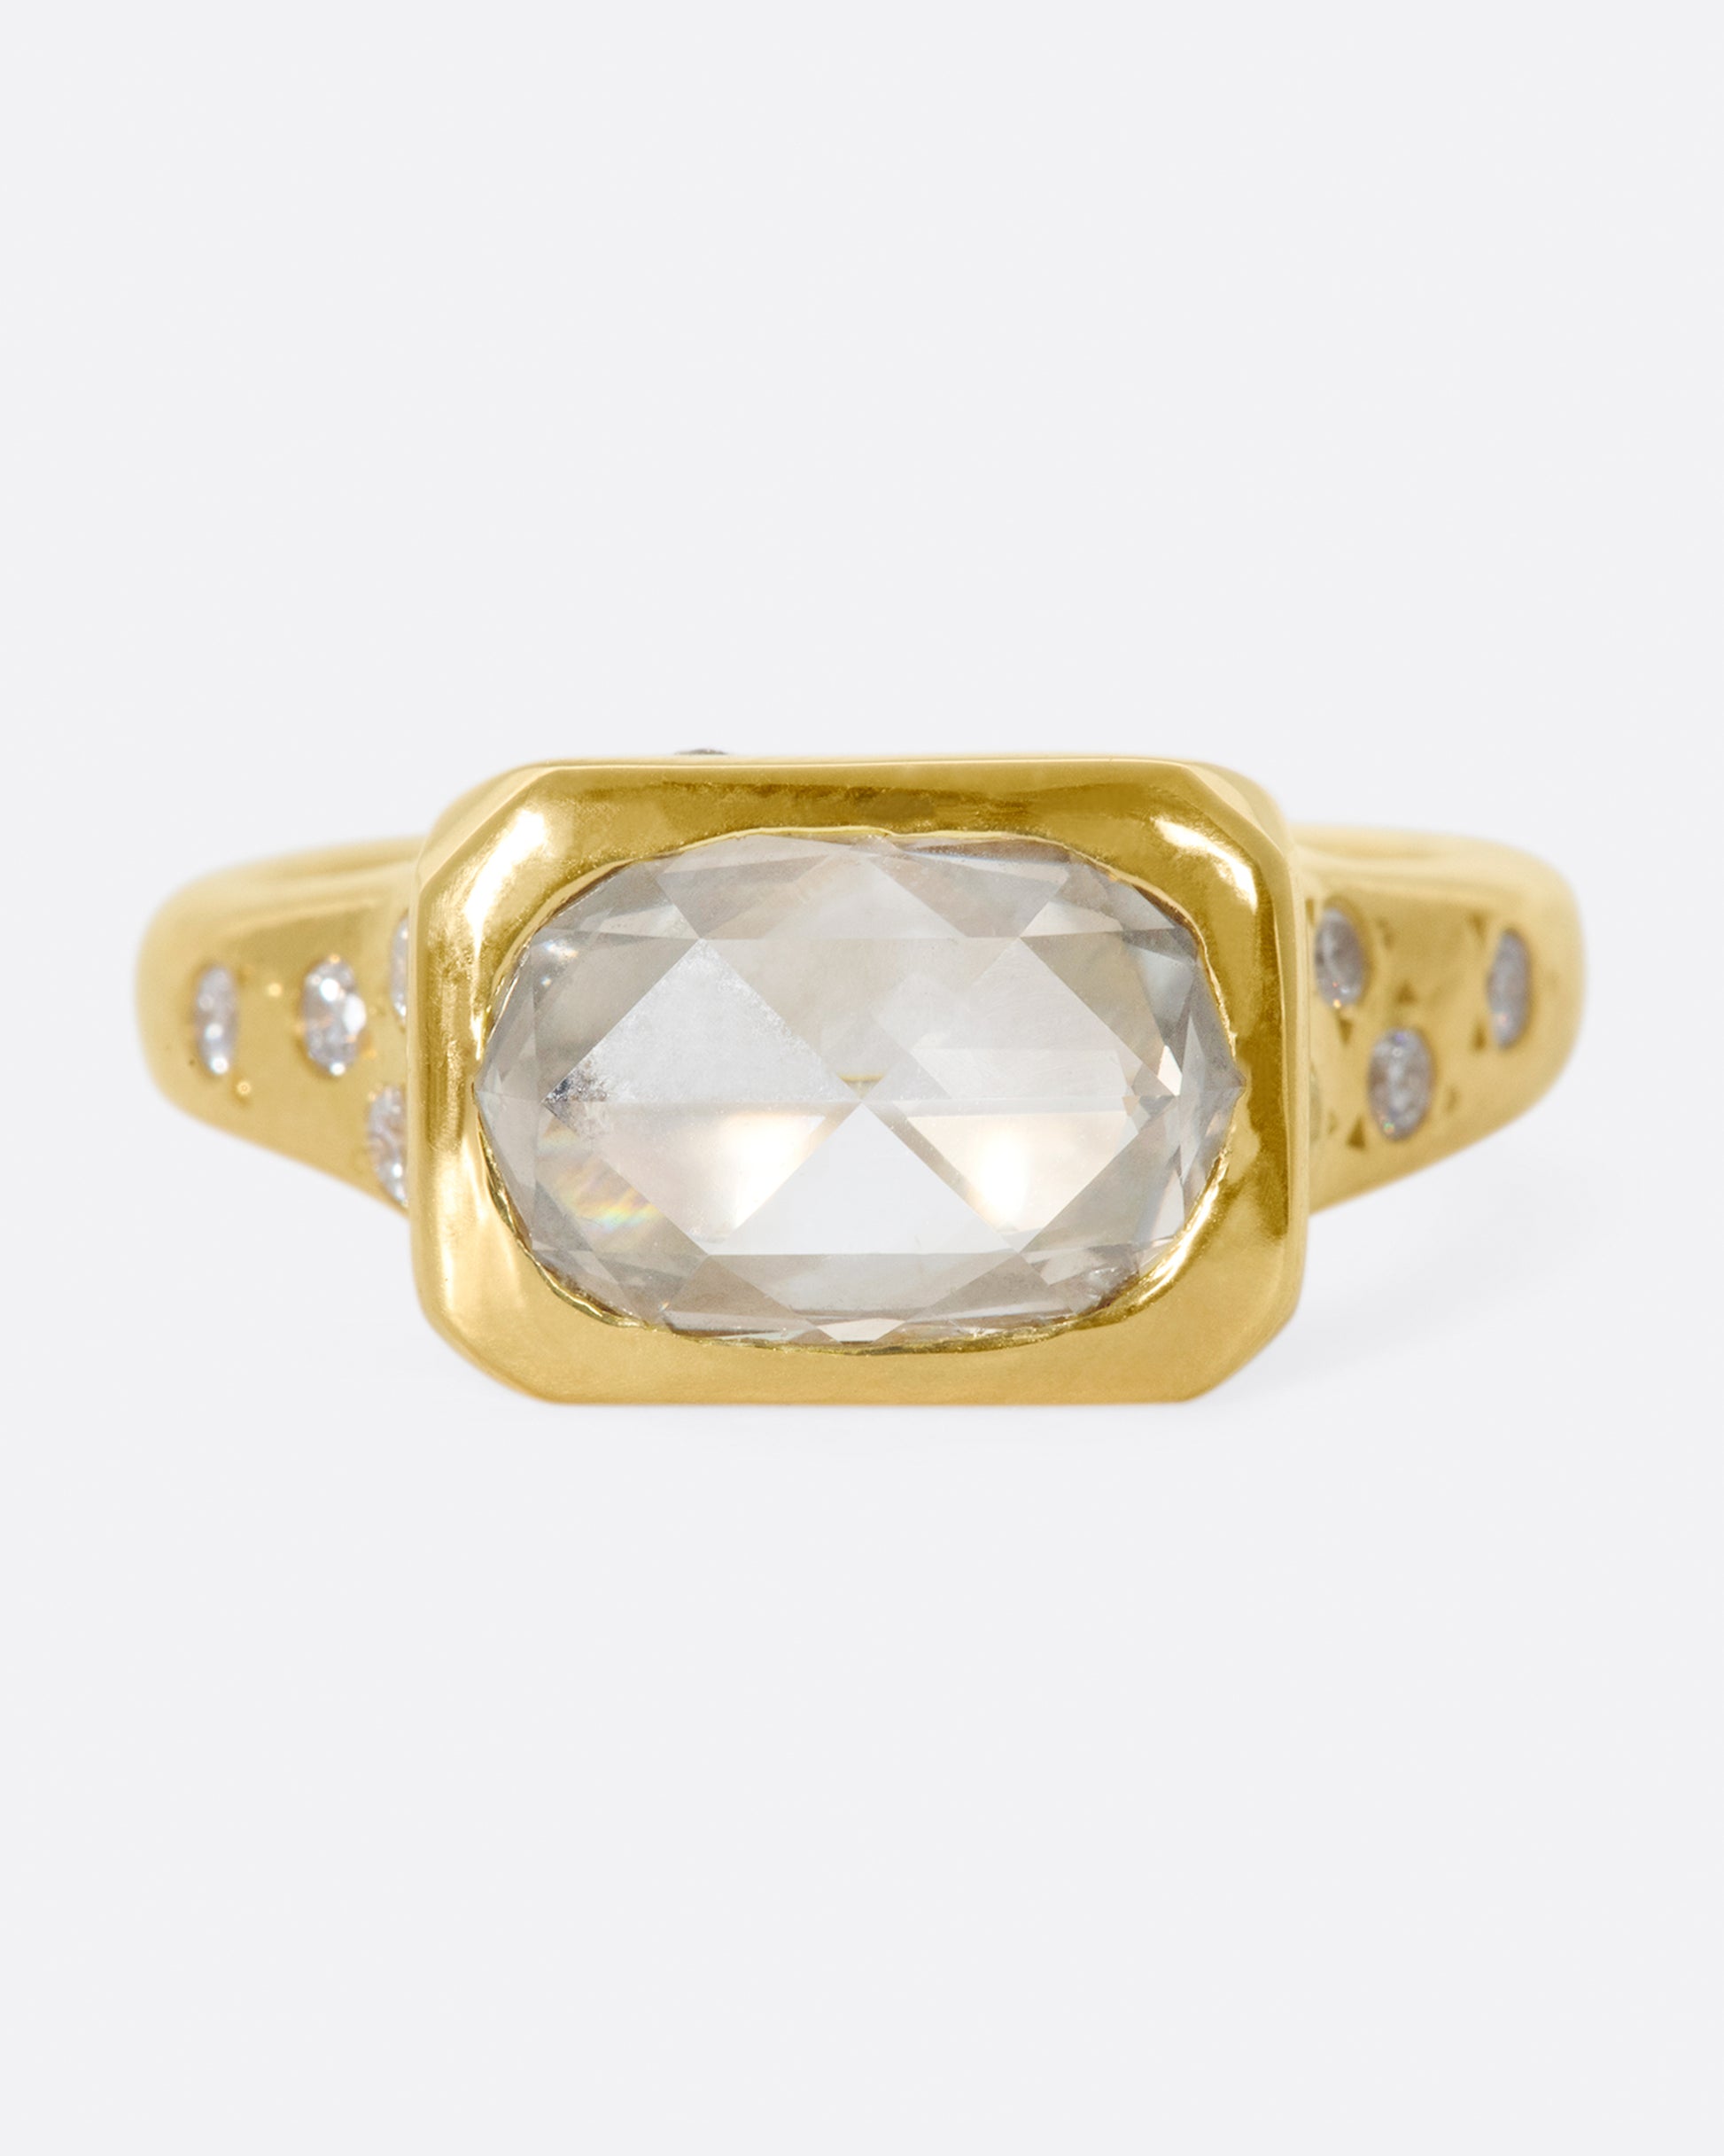 This ring creates a balance between being classic, impactful and a bit playful.